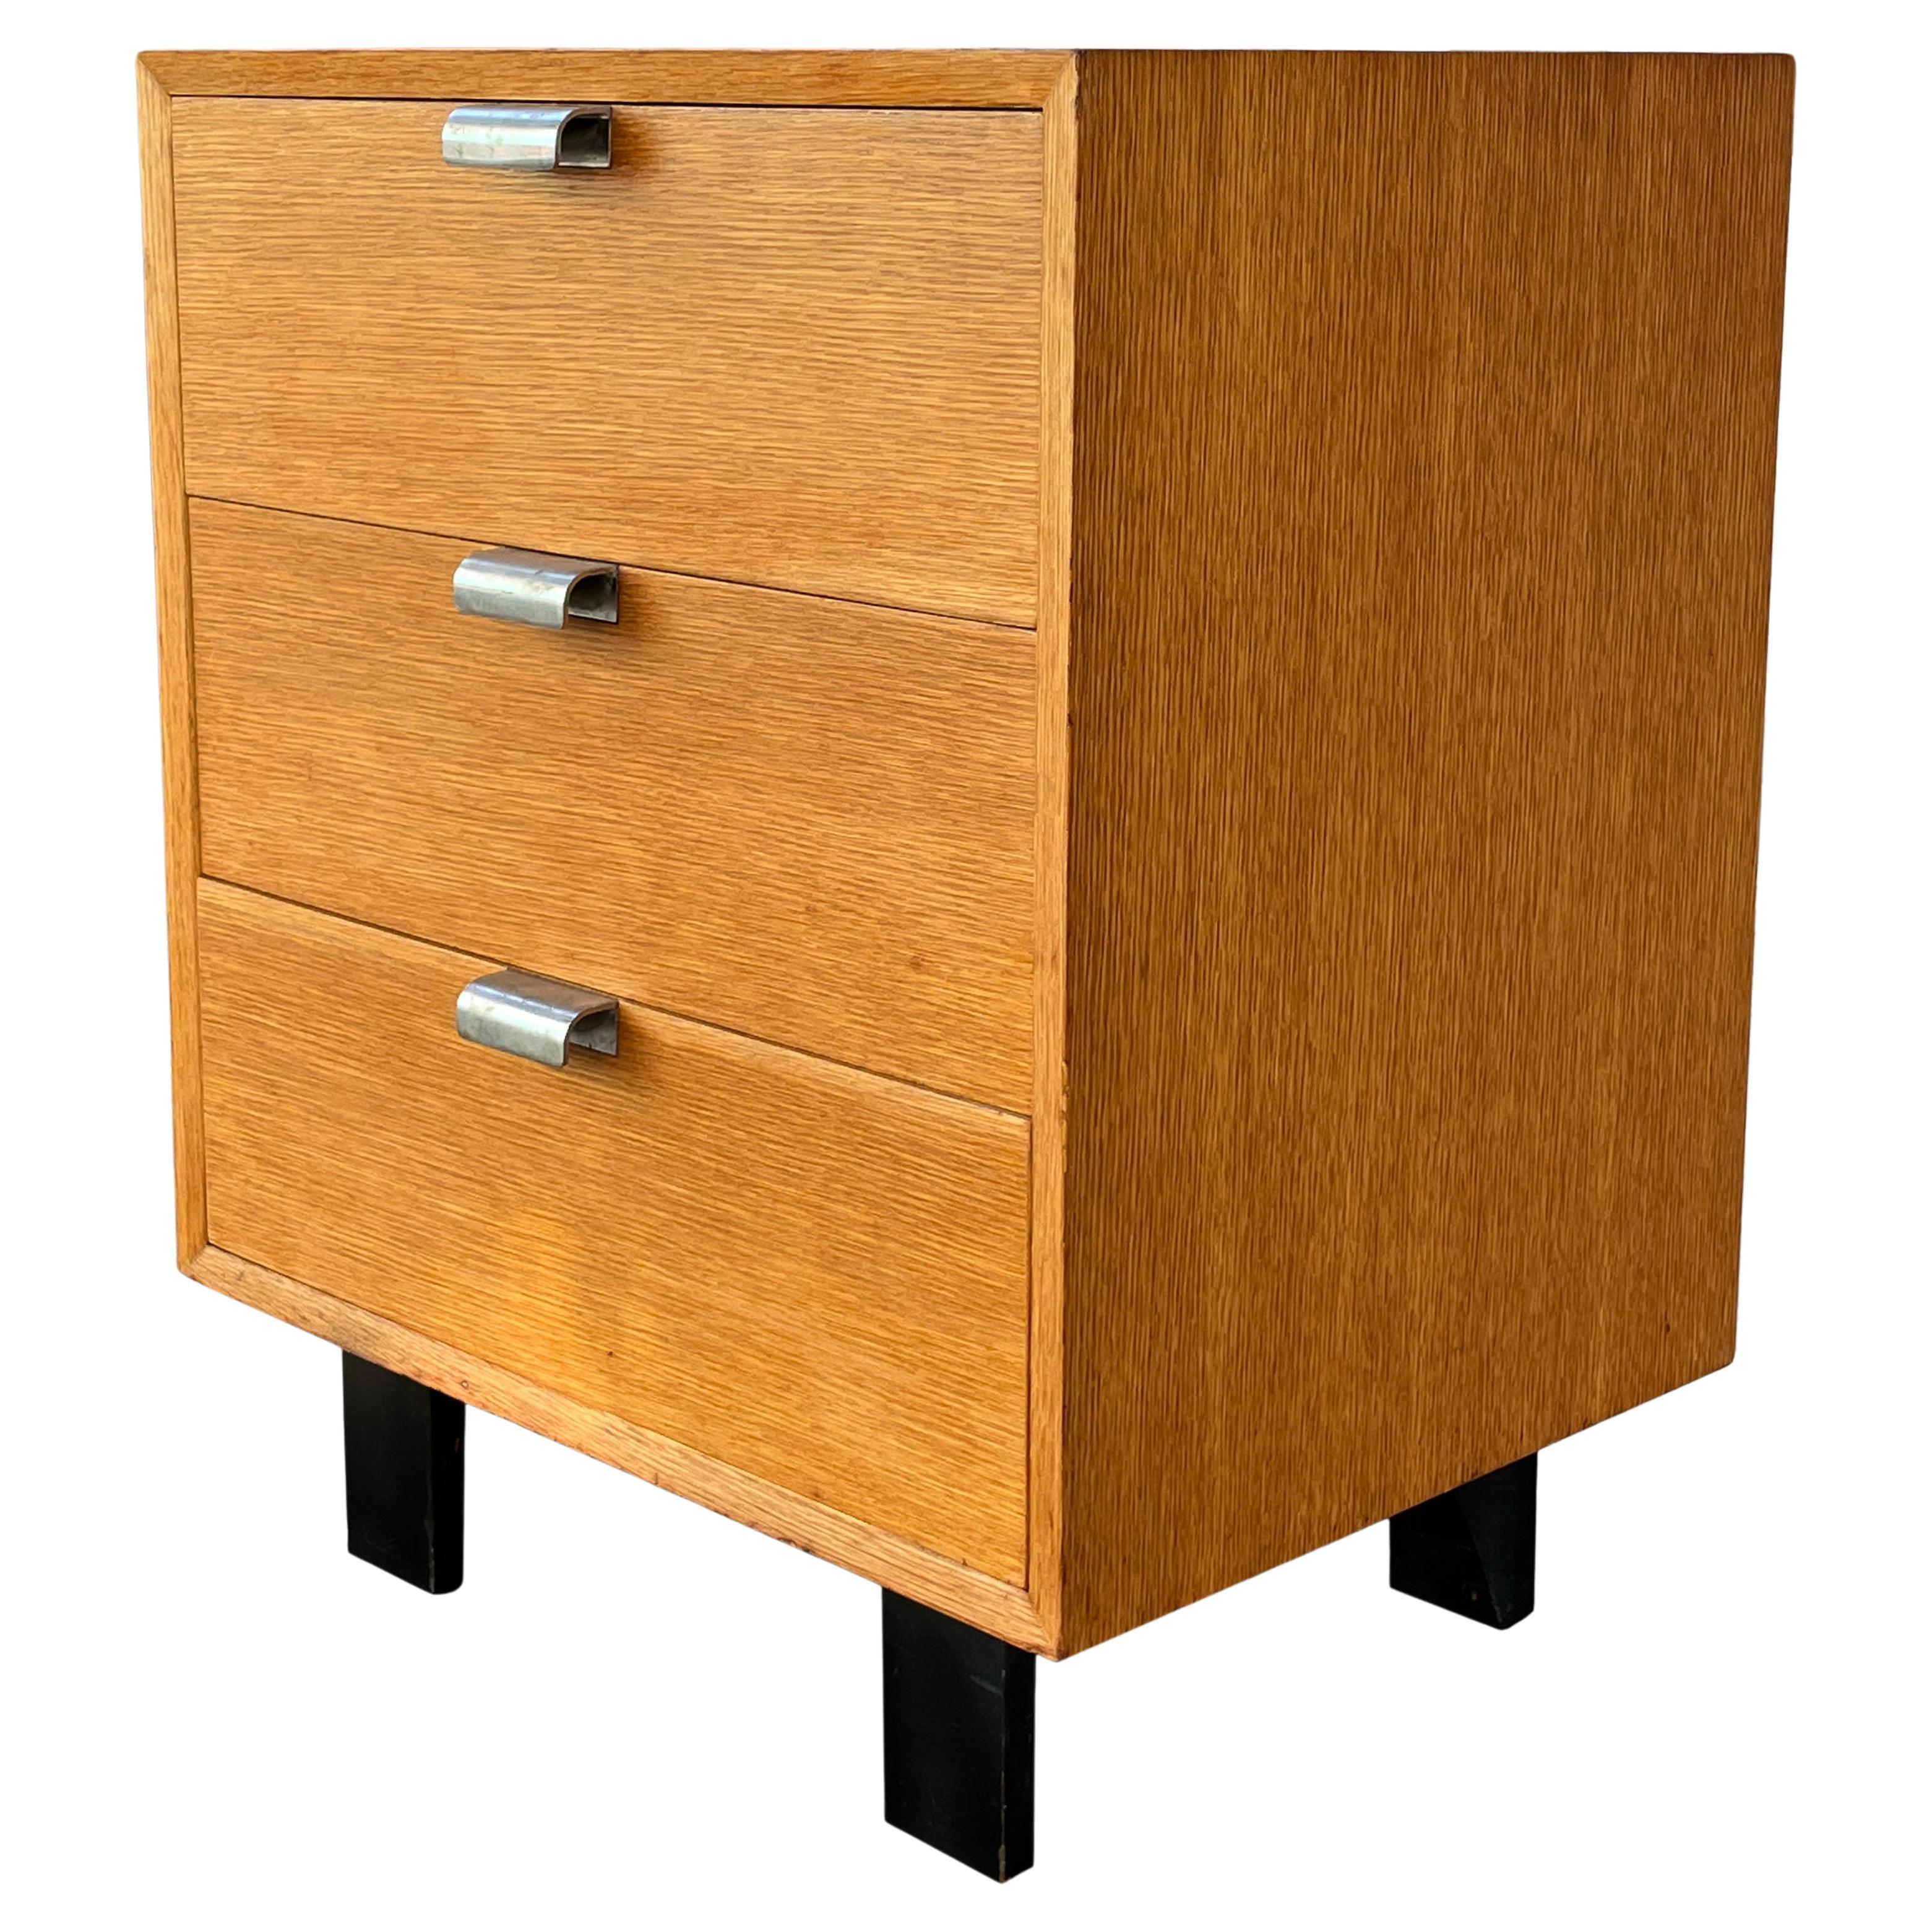 Gorgeous BCS chest of drawers in original brown ash designed by George Nelson for Herman Miller. This is a very early version with plated metal pulls not aluminum and unusual finished back. This versatile unit is a perfect small dresser, nightstand,